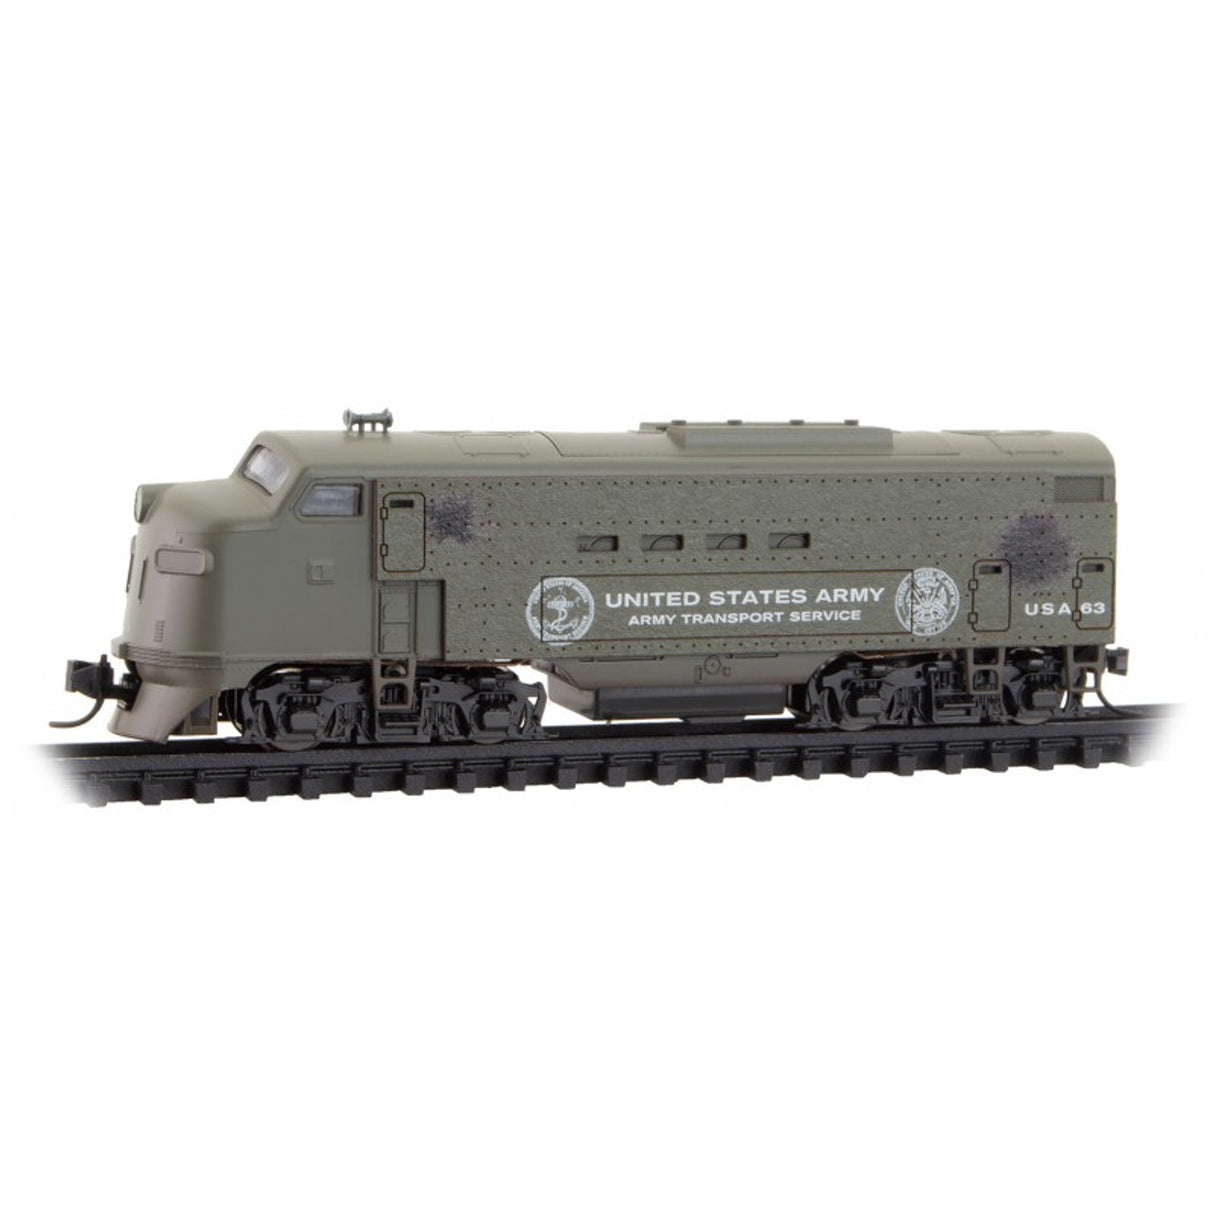 Micro Trains N Scale War of the Worlds FT Locomotive United States Army (USA) 63